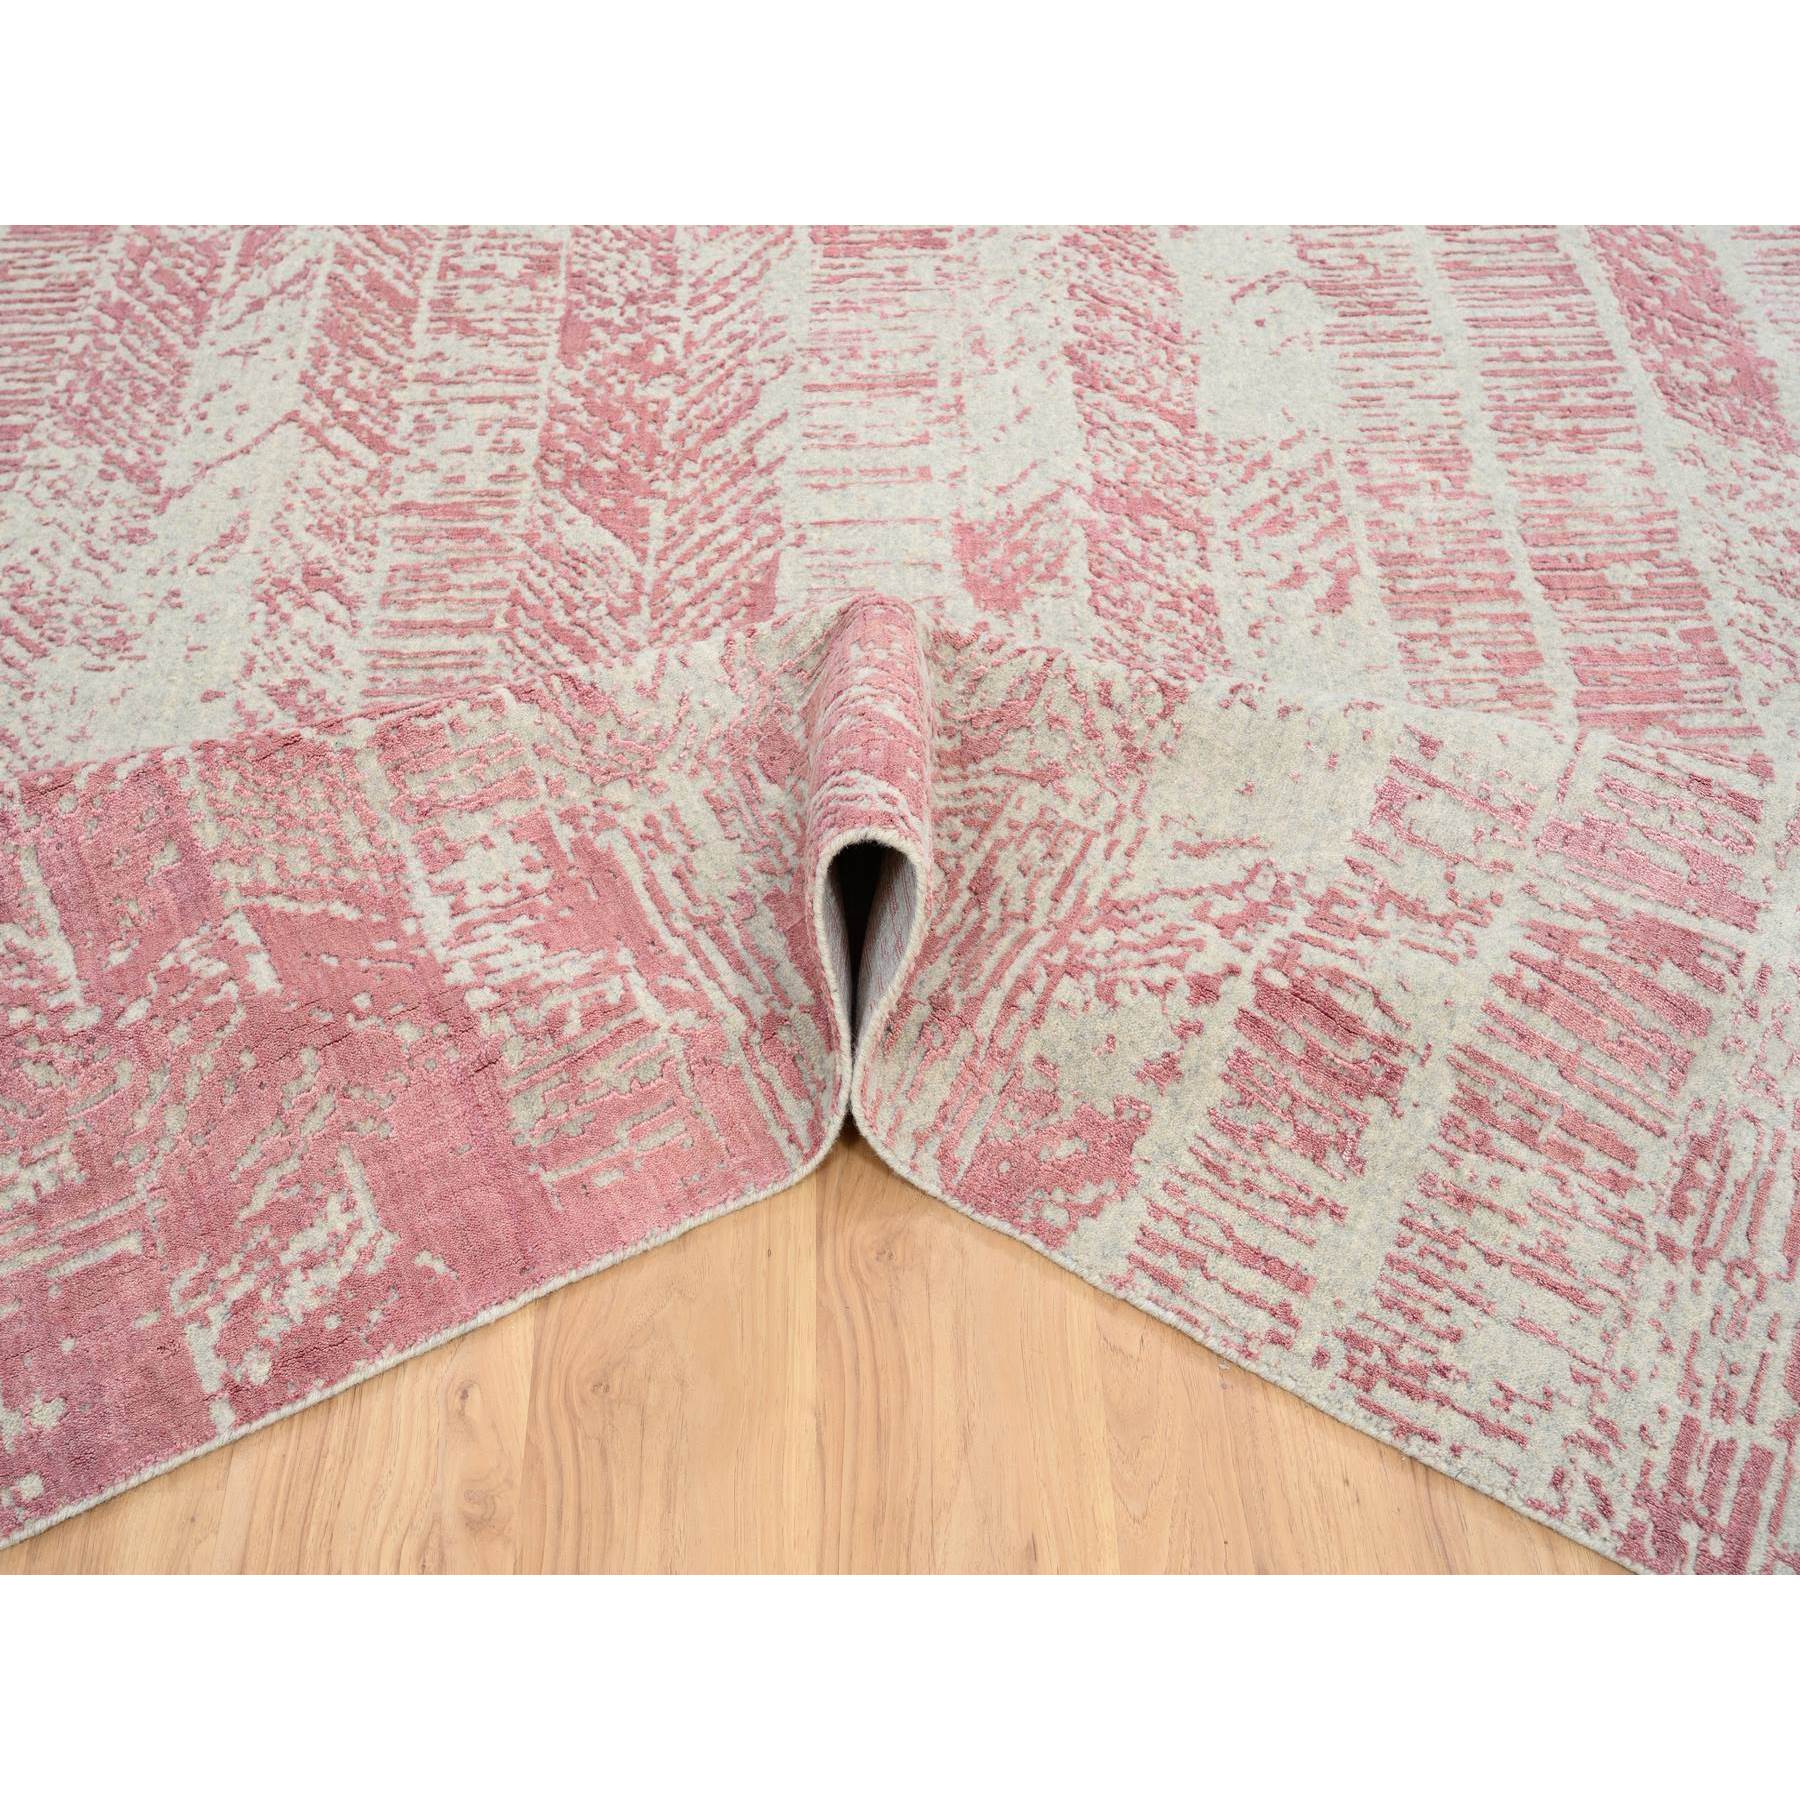 9'x11'9" Rose Pink, Jacquard Hand Loomed All Over Design, Wool and Art Silk, Oriental Rug 